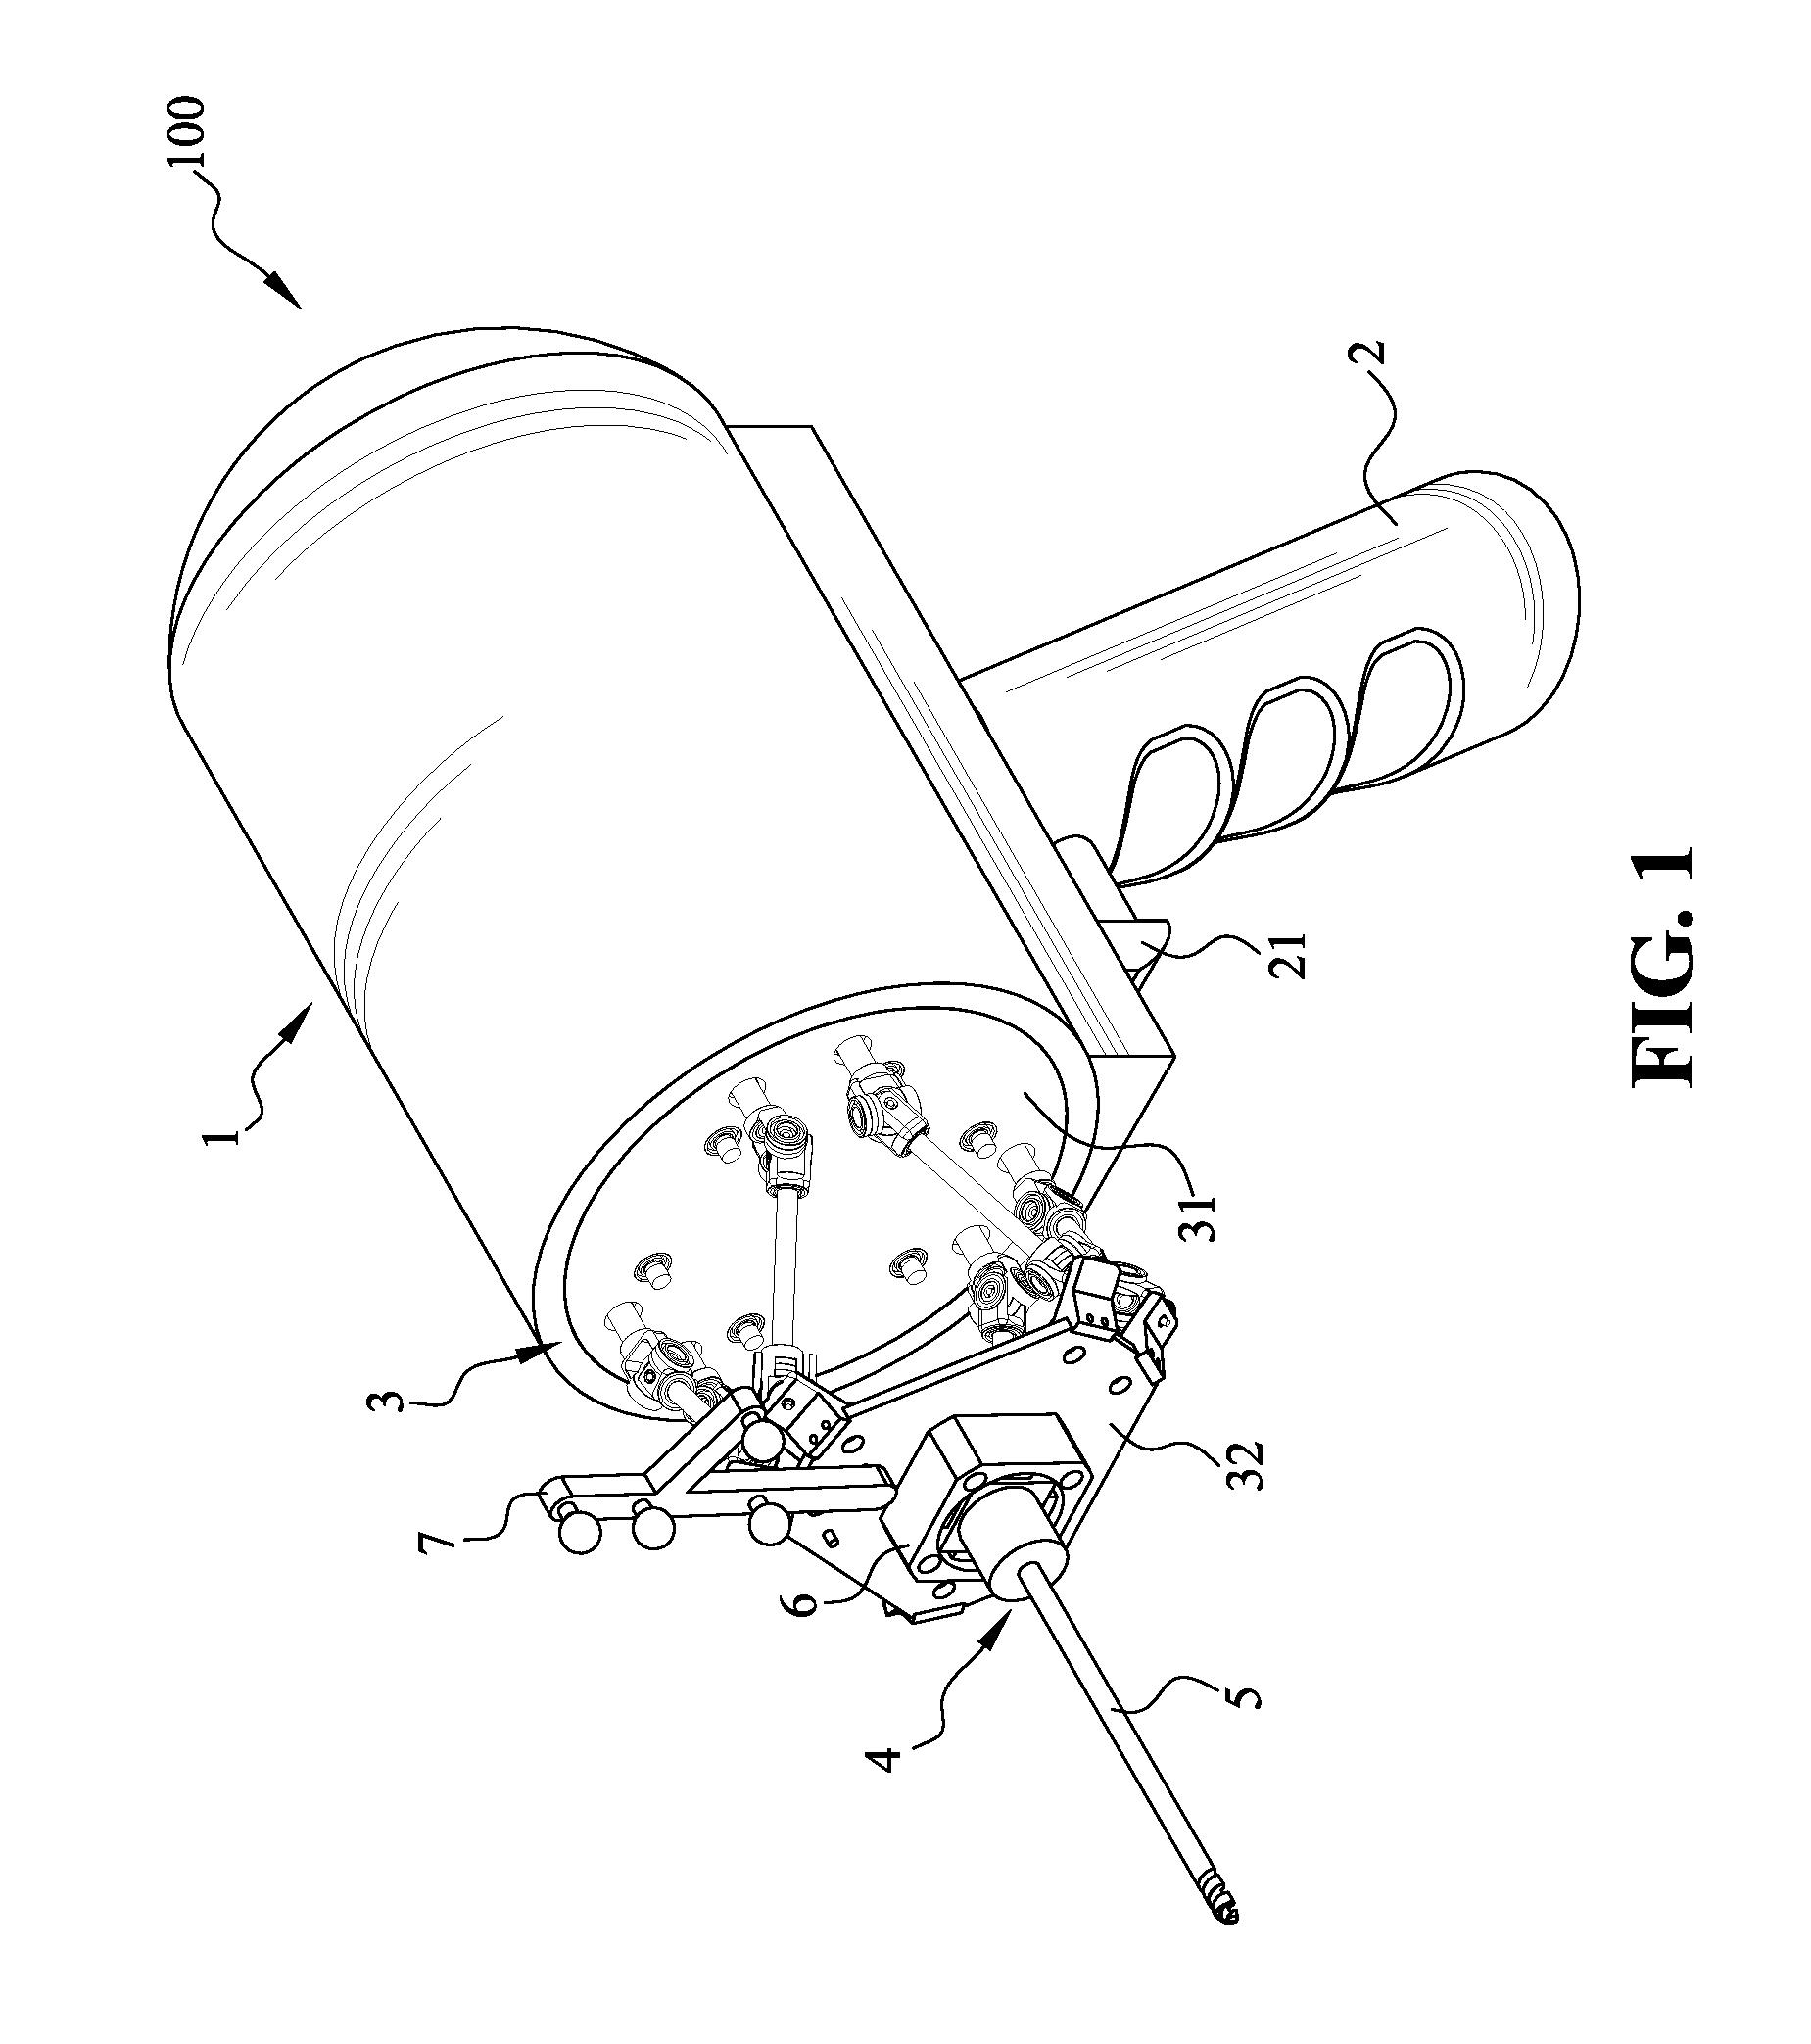 Handheld robot for orthopedic surgery and control method thereof